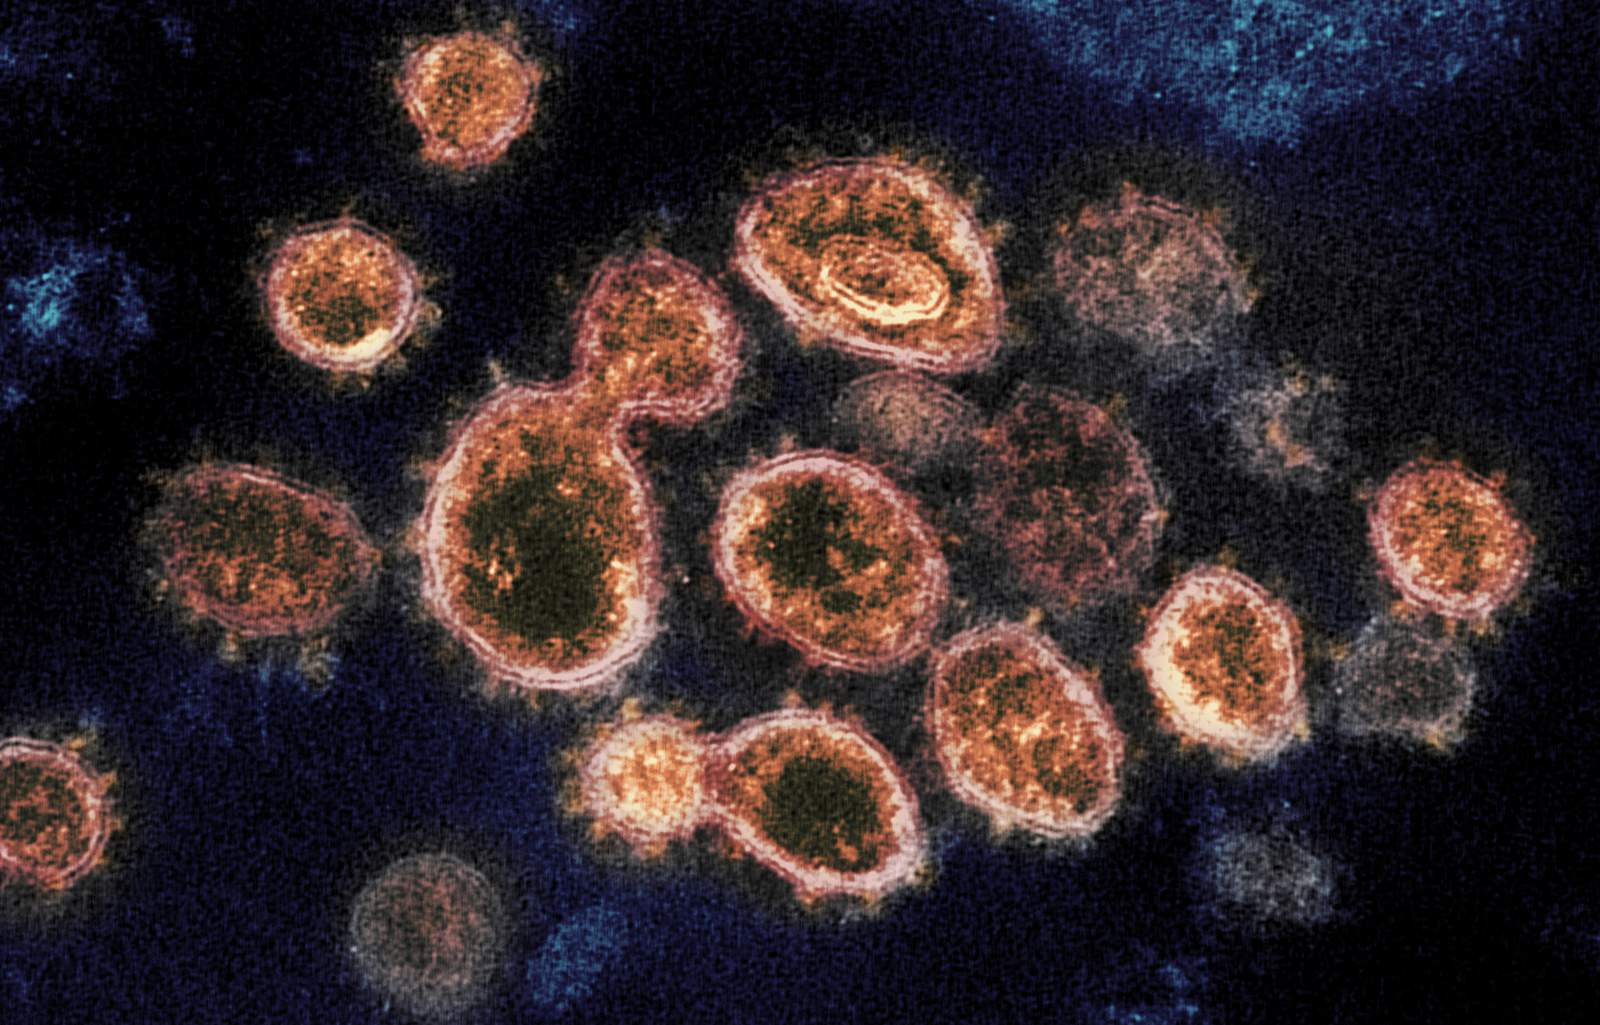 Florida reports first coronavirus case with more contagious British strain